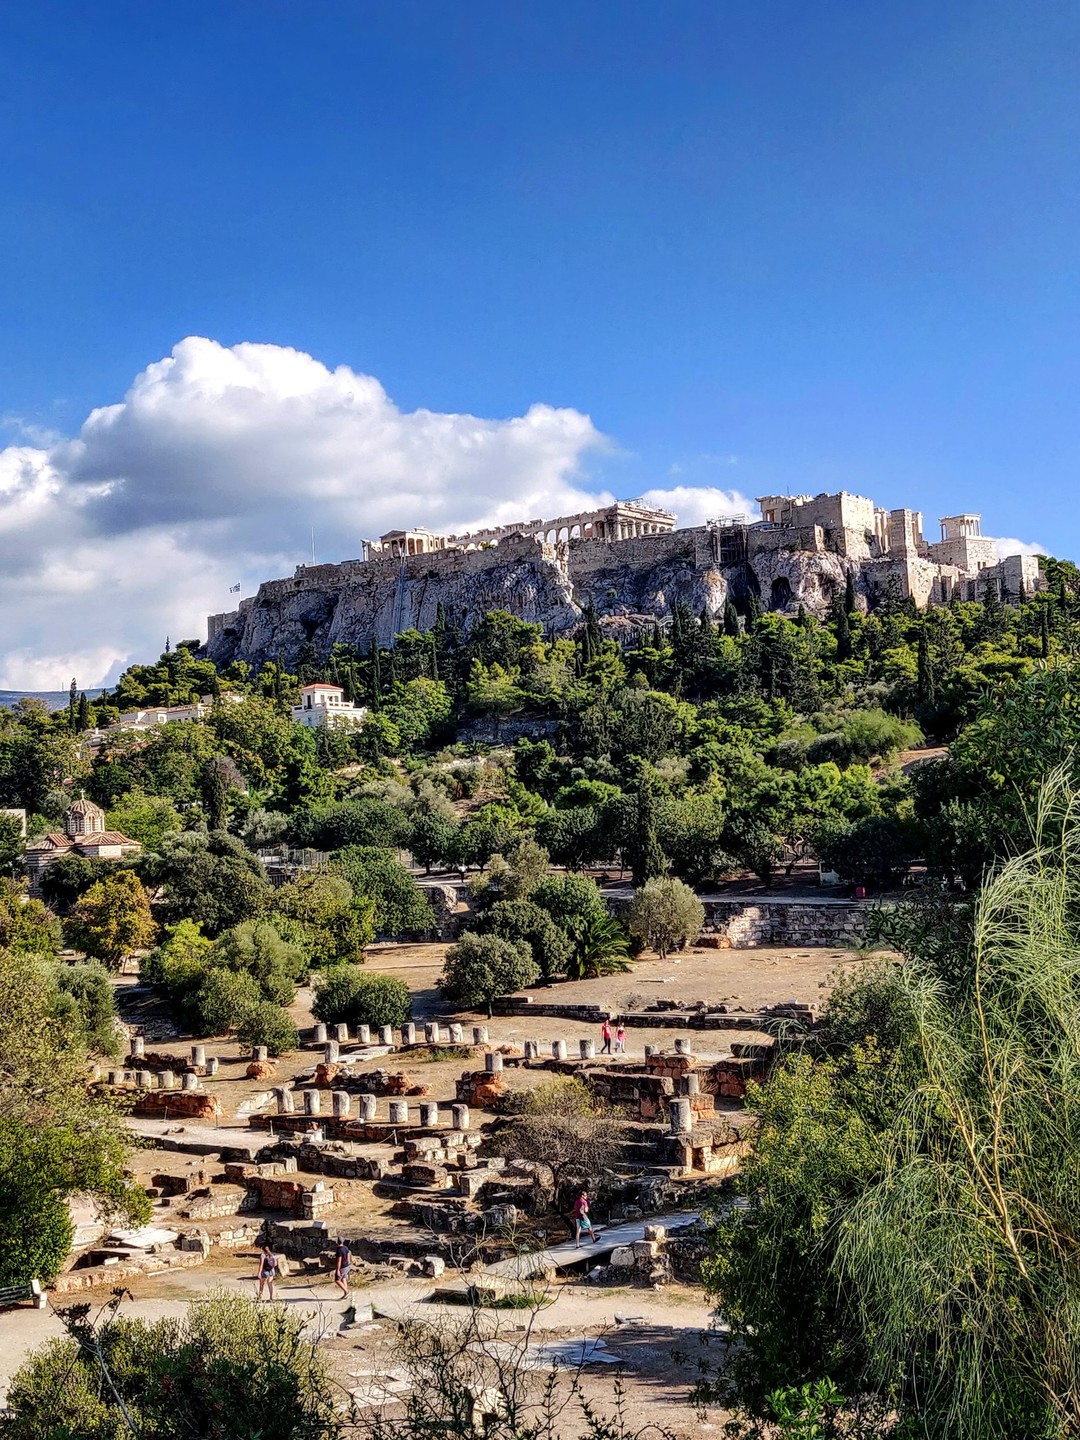 Athens, Greece: One of the best romantic getaways for couples who love culture.